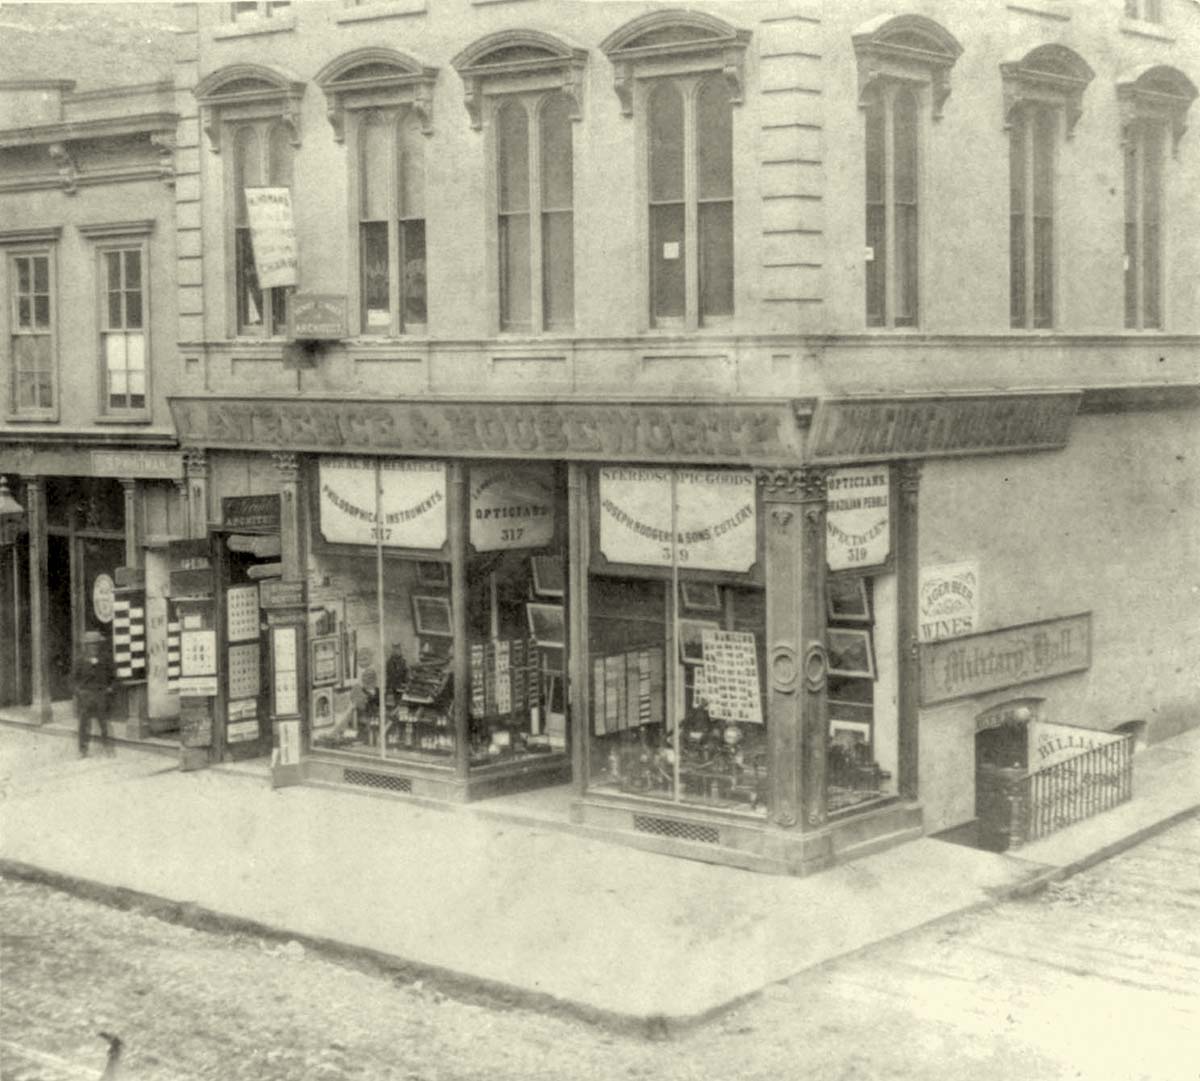 San Francisco, California. Exterior of Lawrence and Houseworth's Store